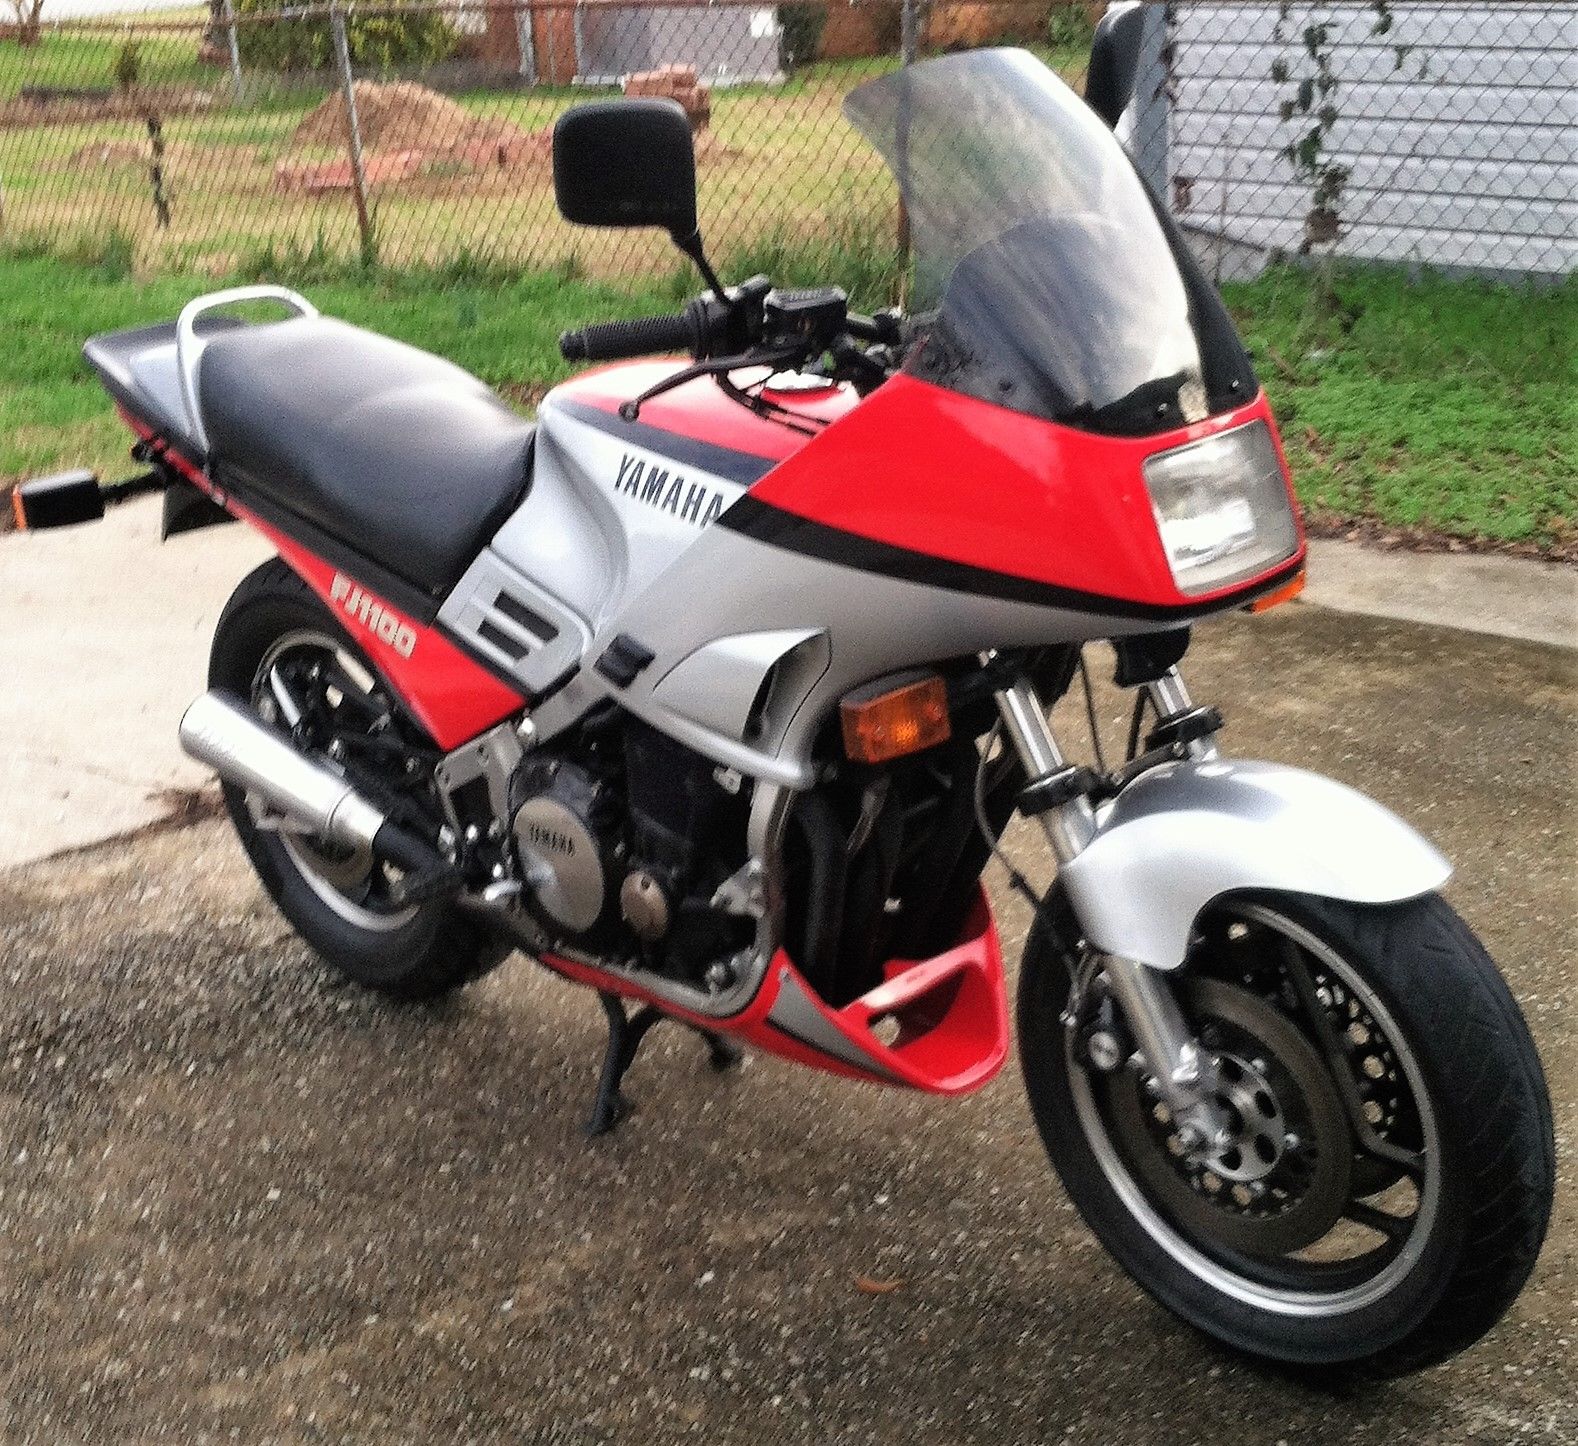 Review of Yamaha FJ 1100 1984: pictures, live photos 